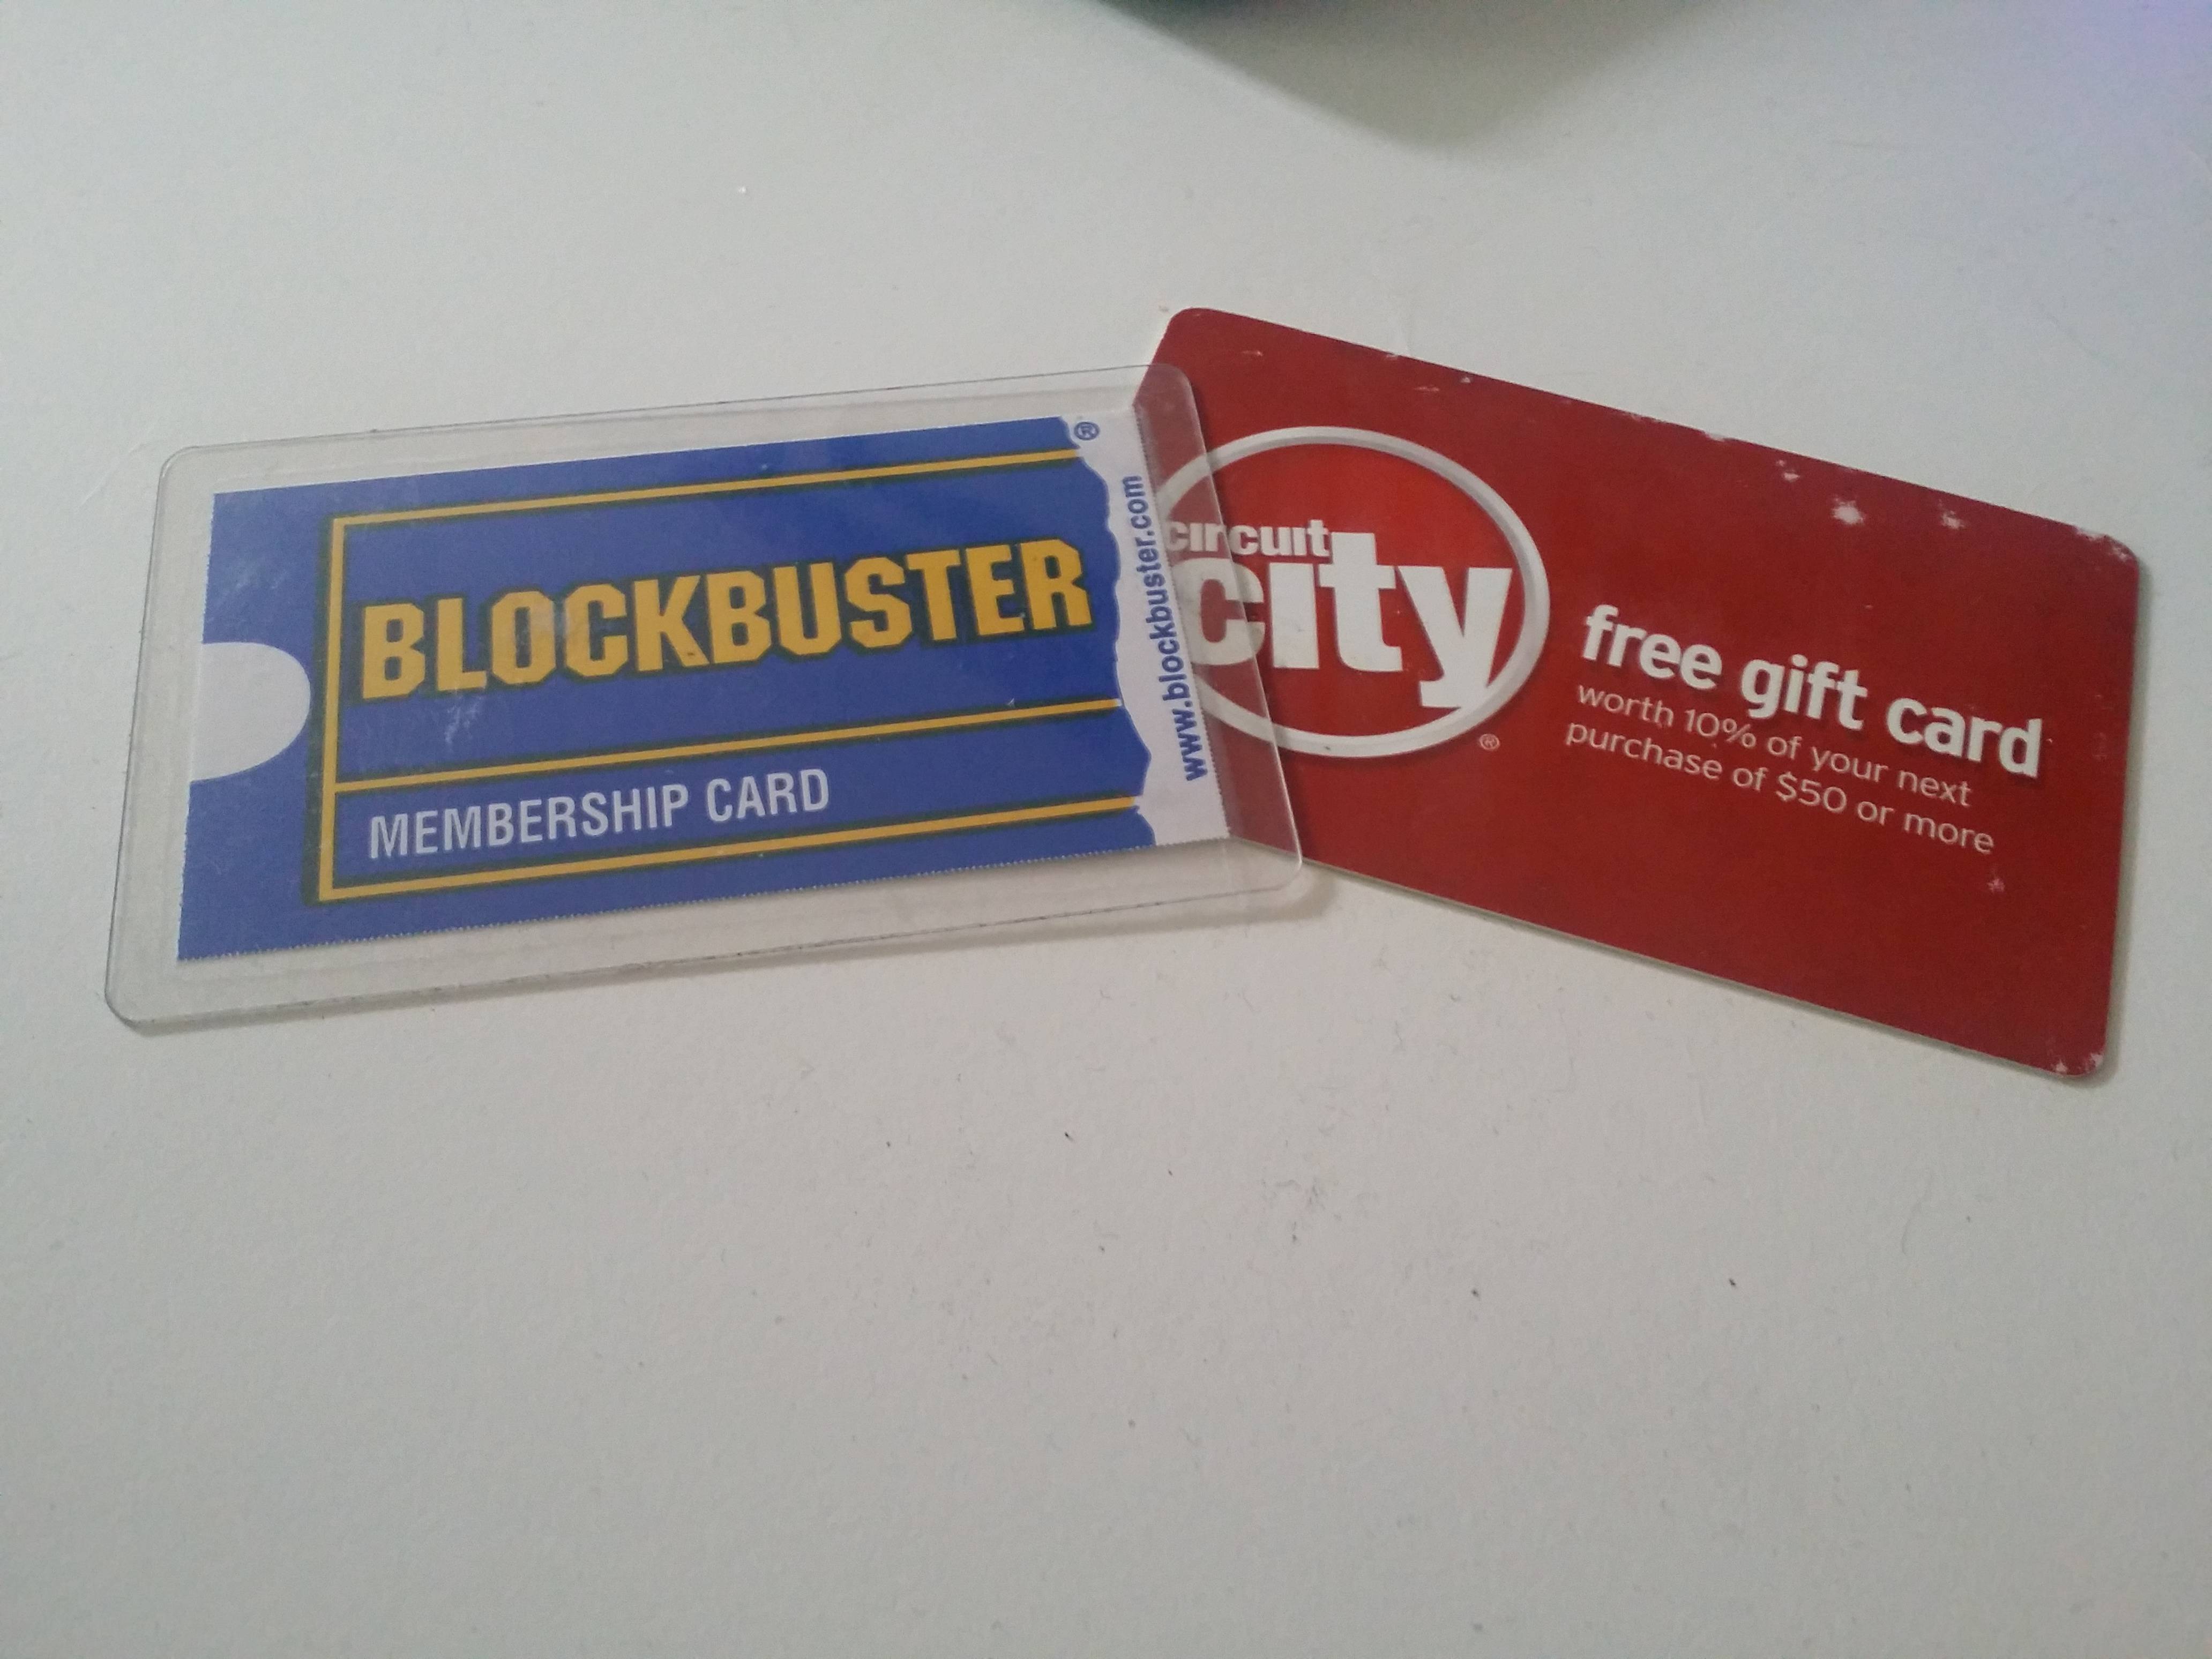 label - Blockbuster City free gift card worth 10% of your next purchase of $50 or more Membership Card